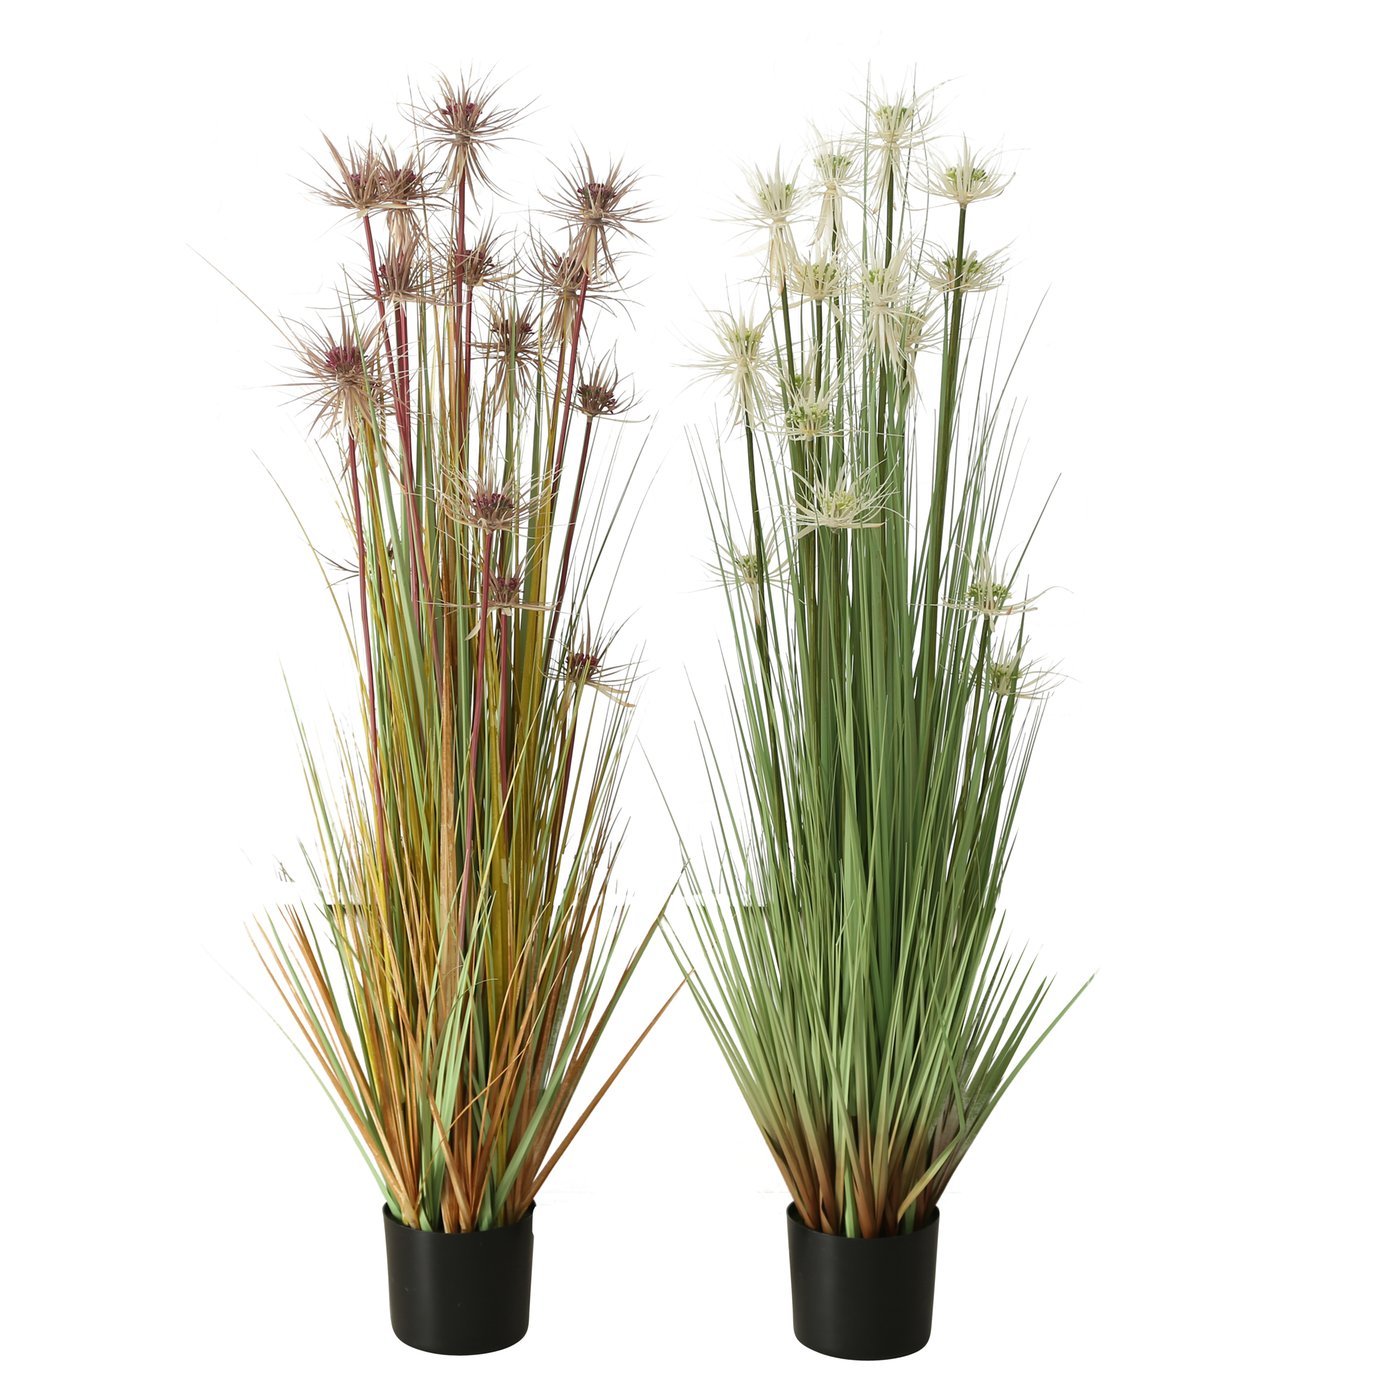 &Quirky Faux Potted Grasses : Brown or Green